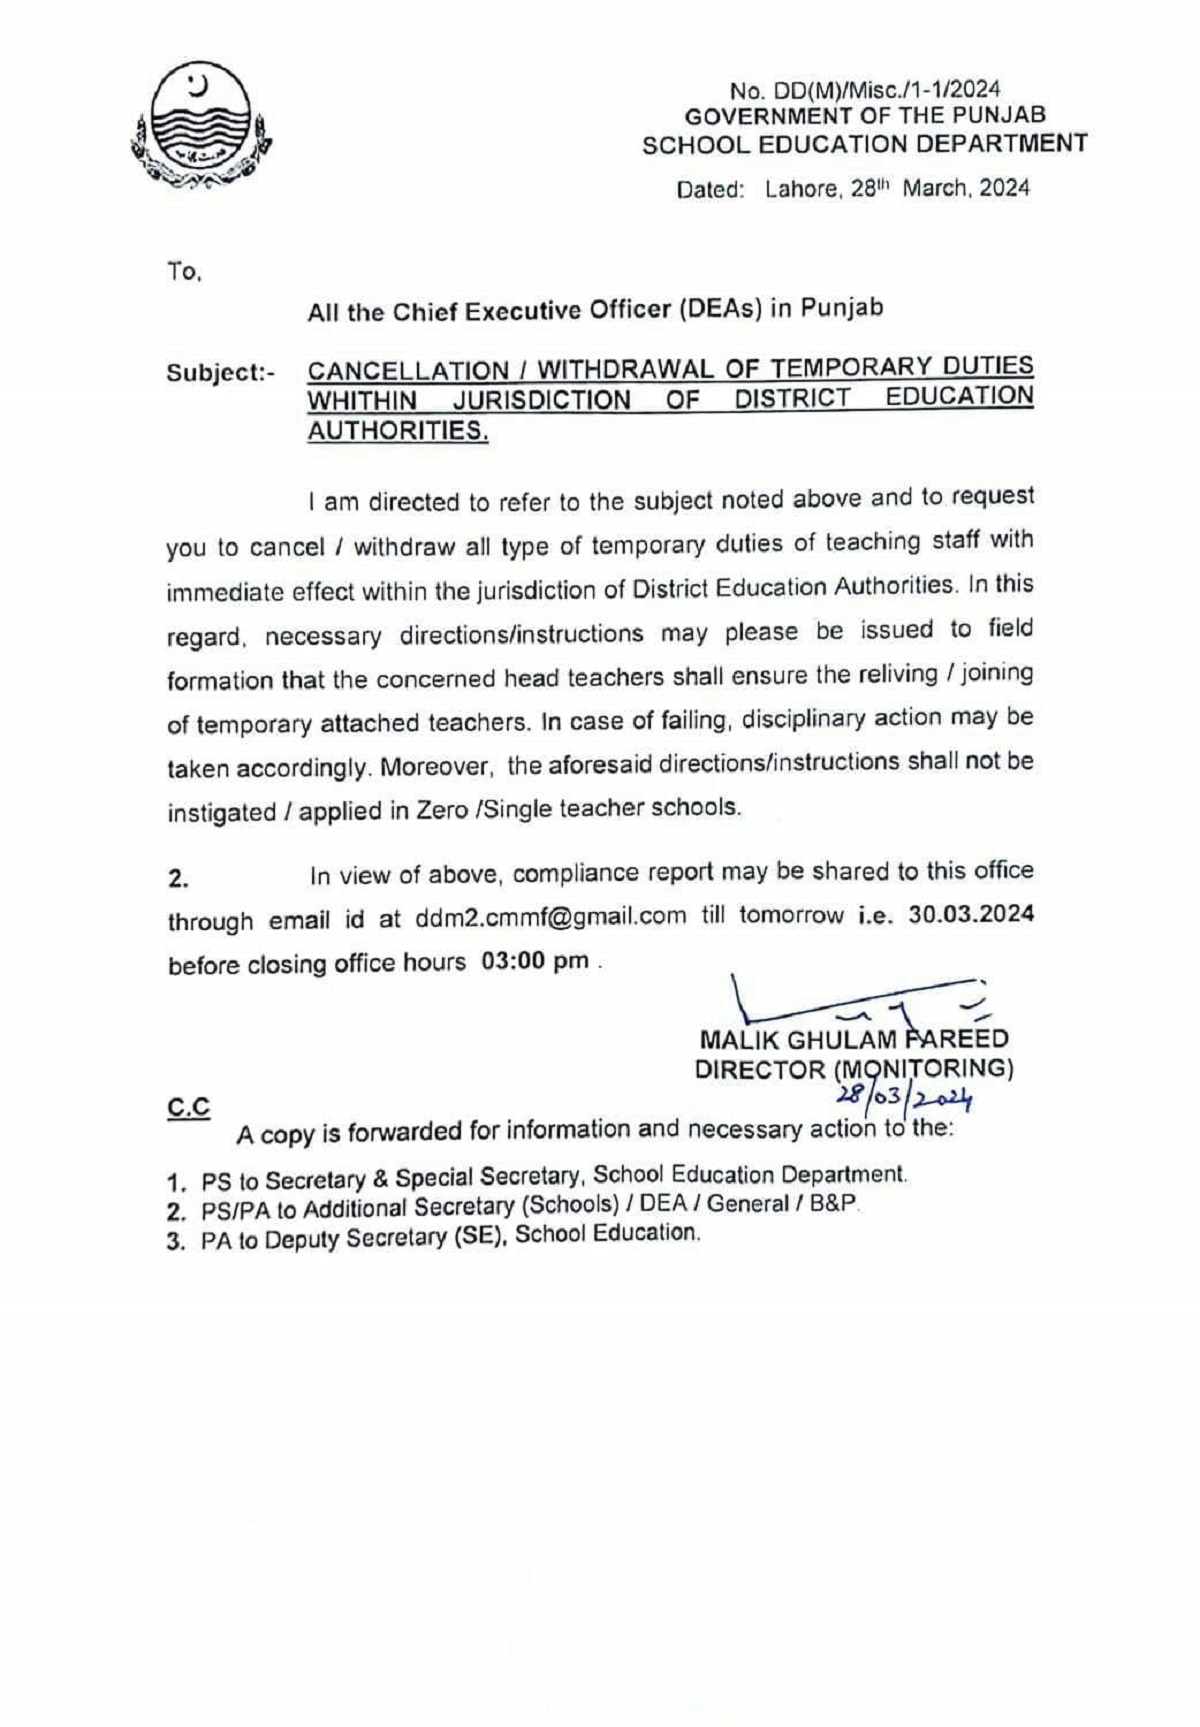 Cancellation of Temporary Duties within District